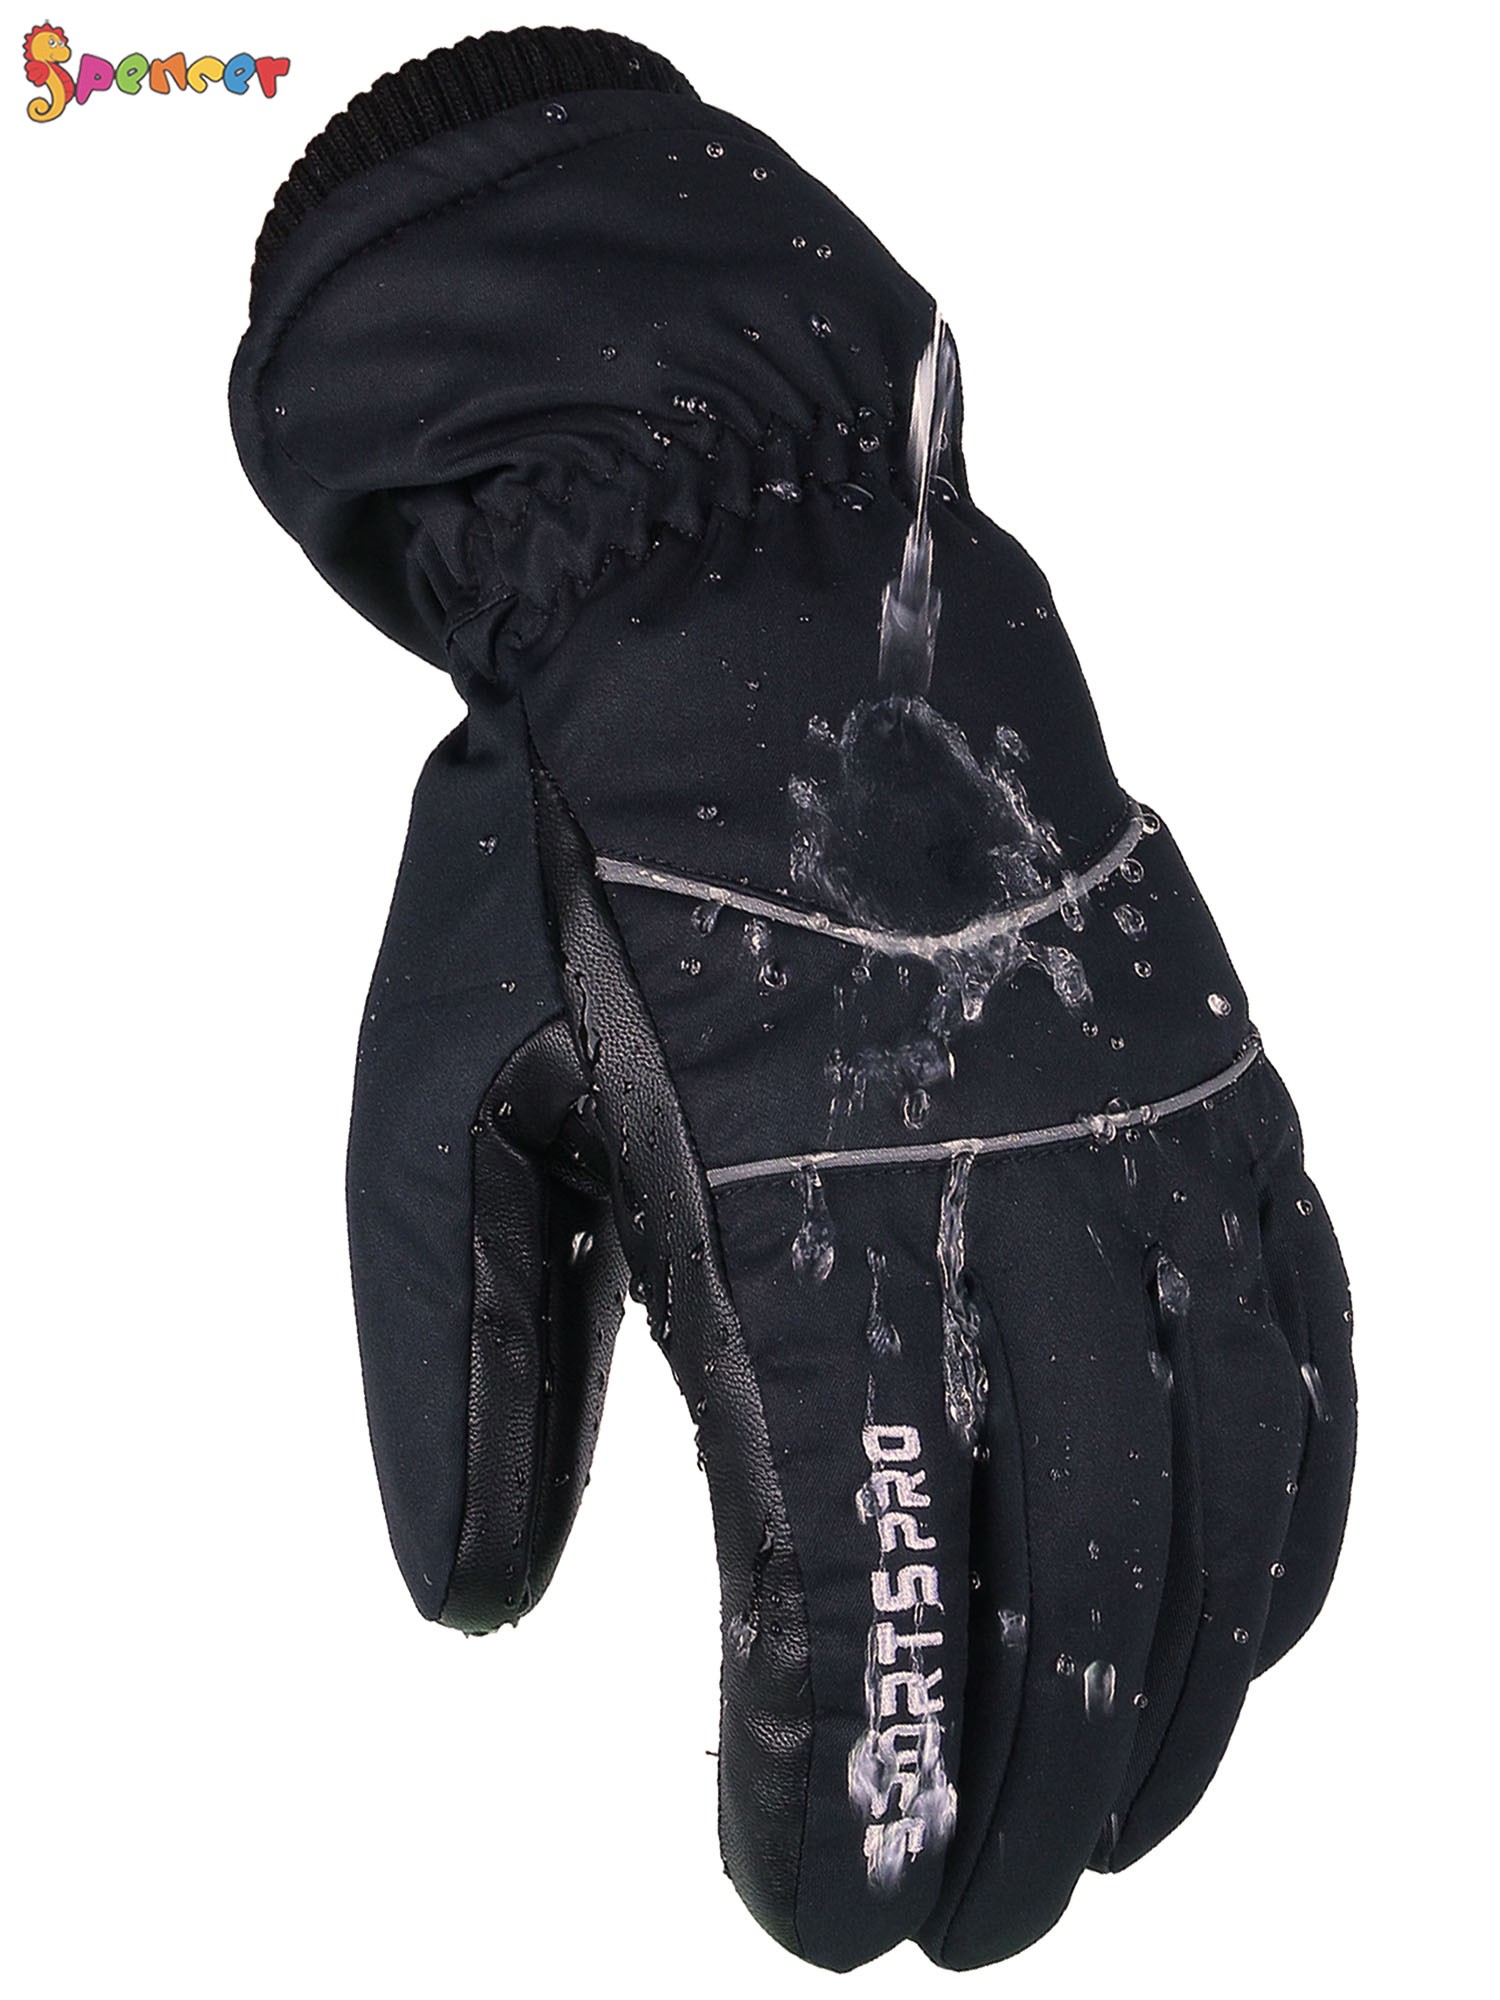 Spencer Ski & Snow Gloves for Men Women, Waterproof Winter Touchscreen Snowboard Gloves for Cold Weather Skiing and Snowboarding - image 4 of 8